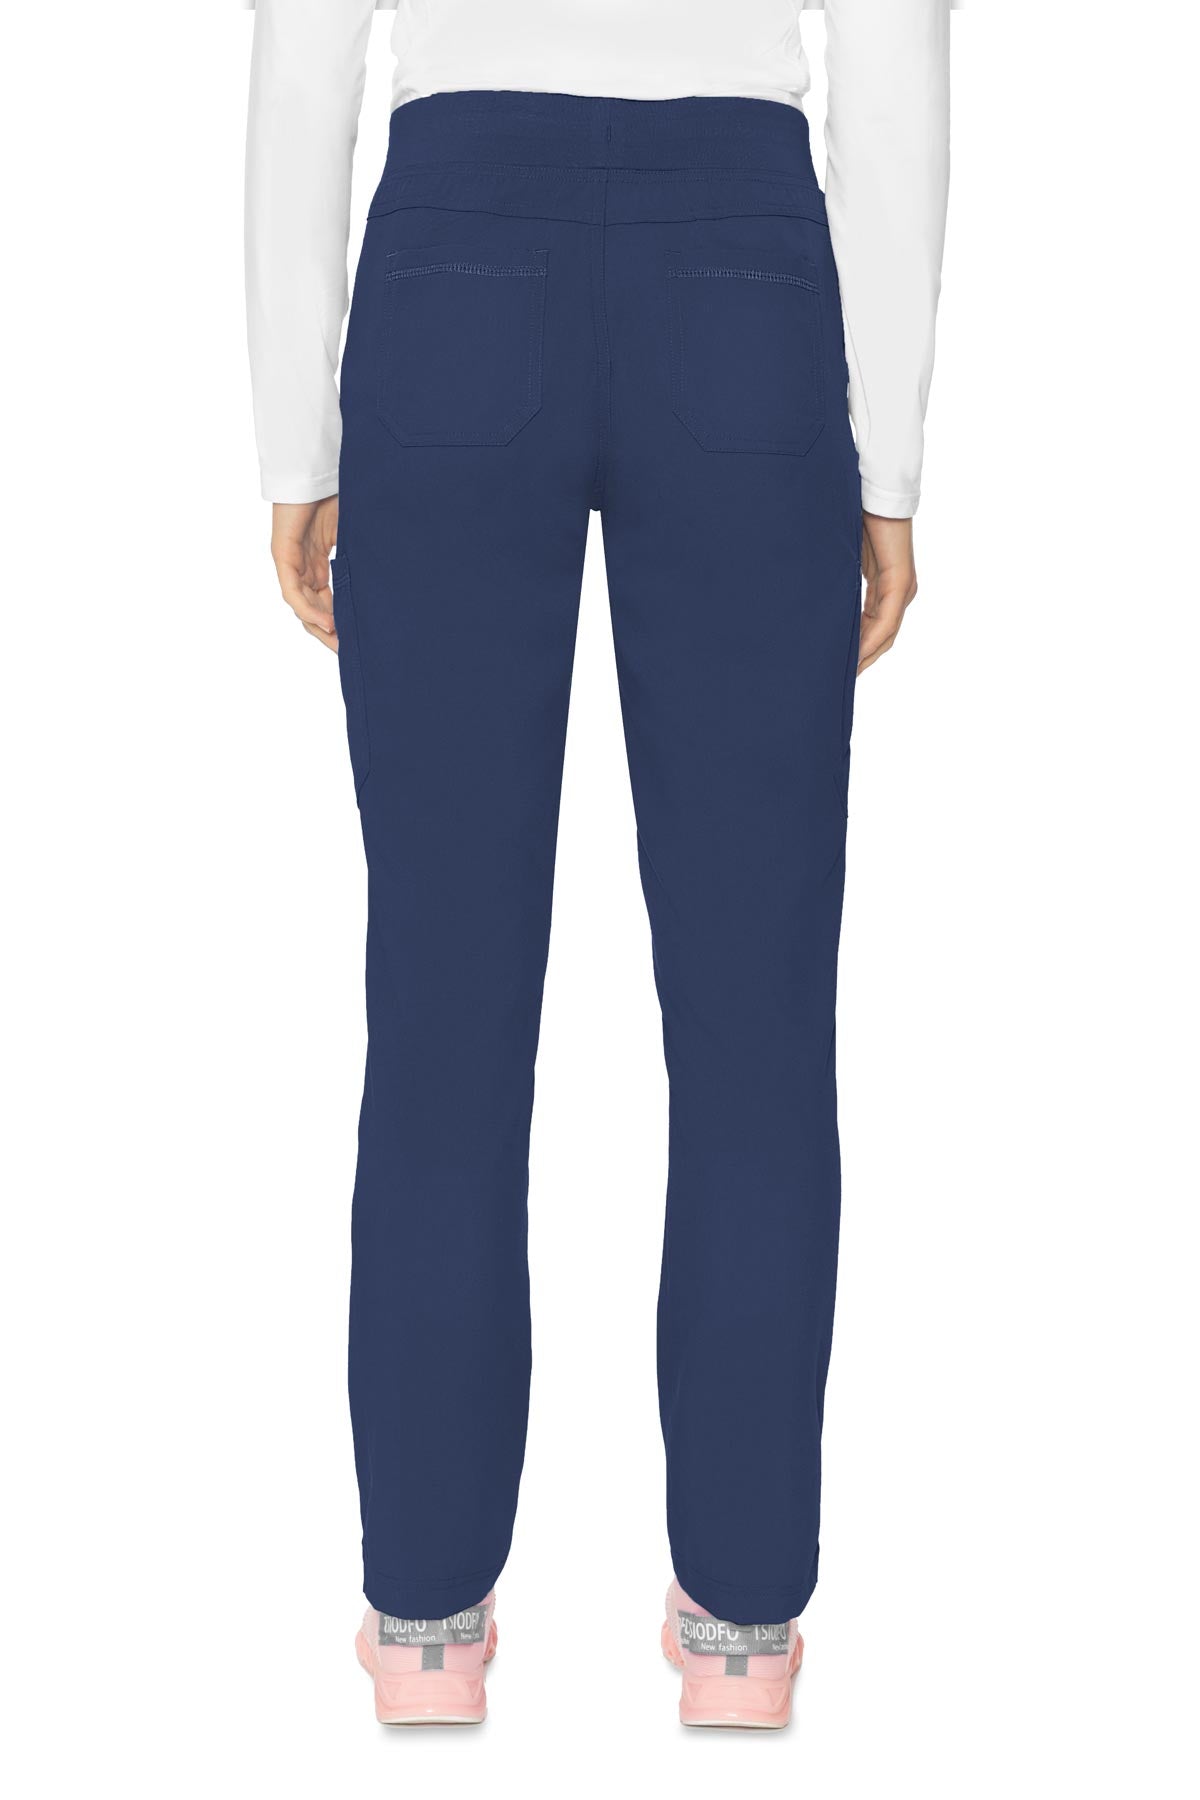 Med Couture Touch 7725 Women's Yoga 2 Cargo Pant Navy Back